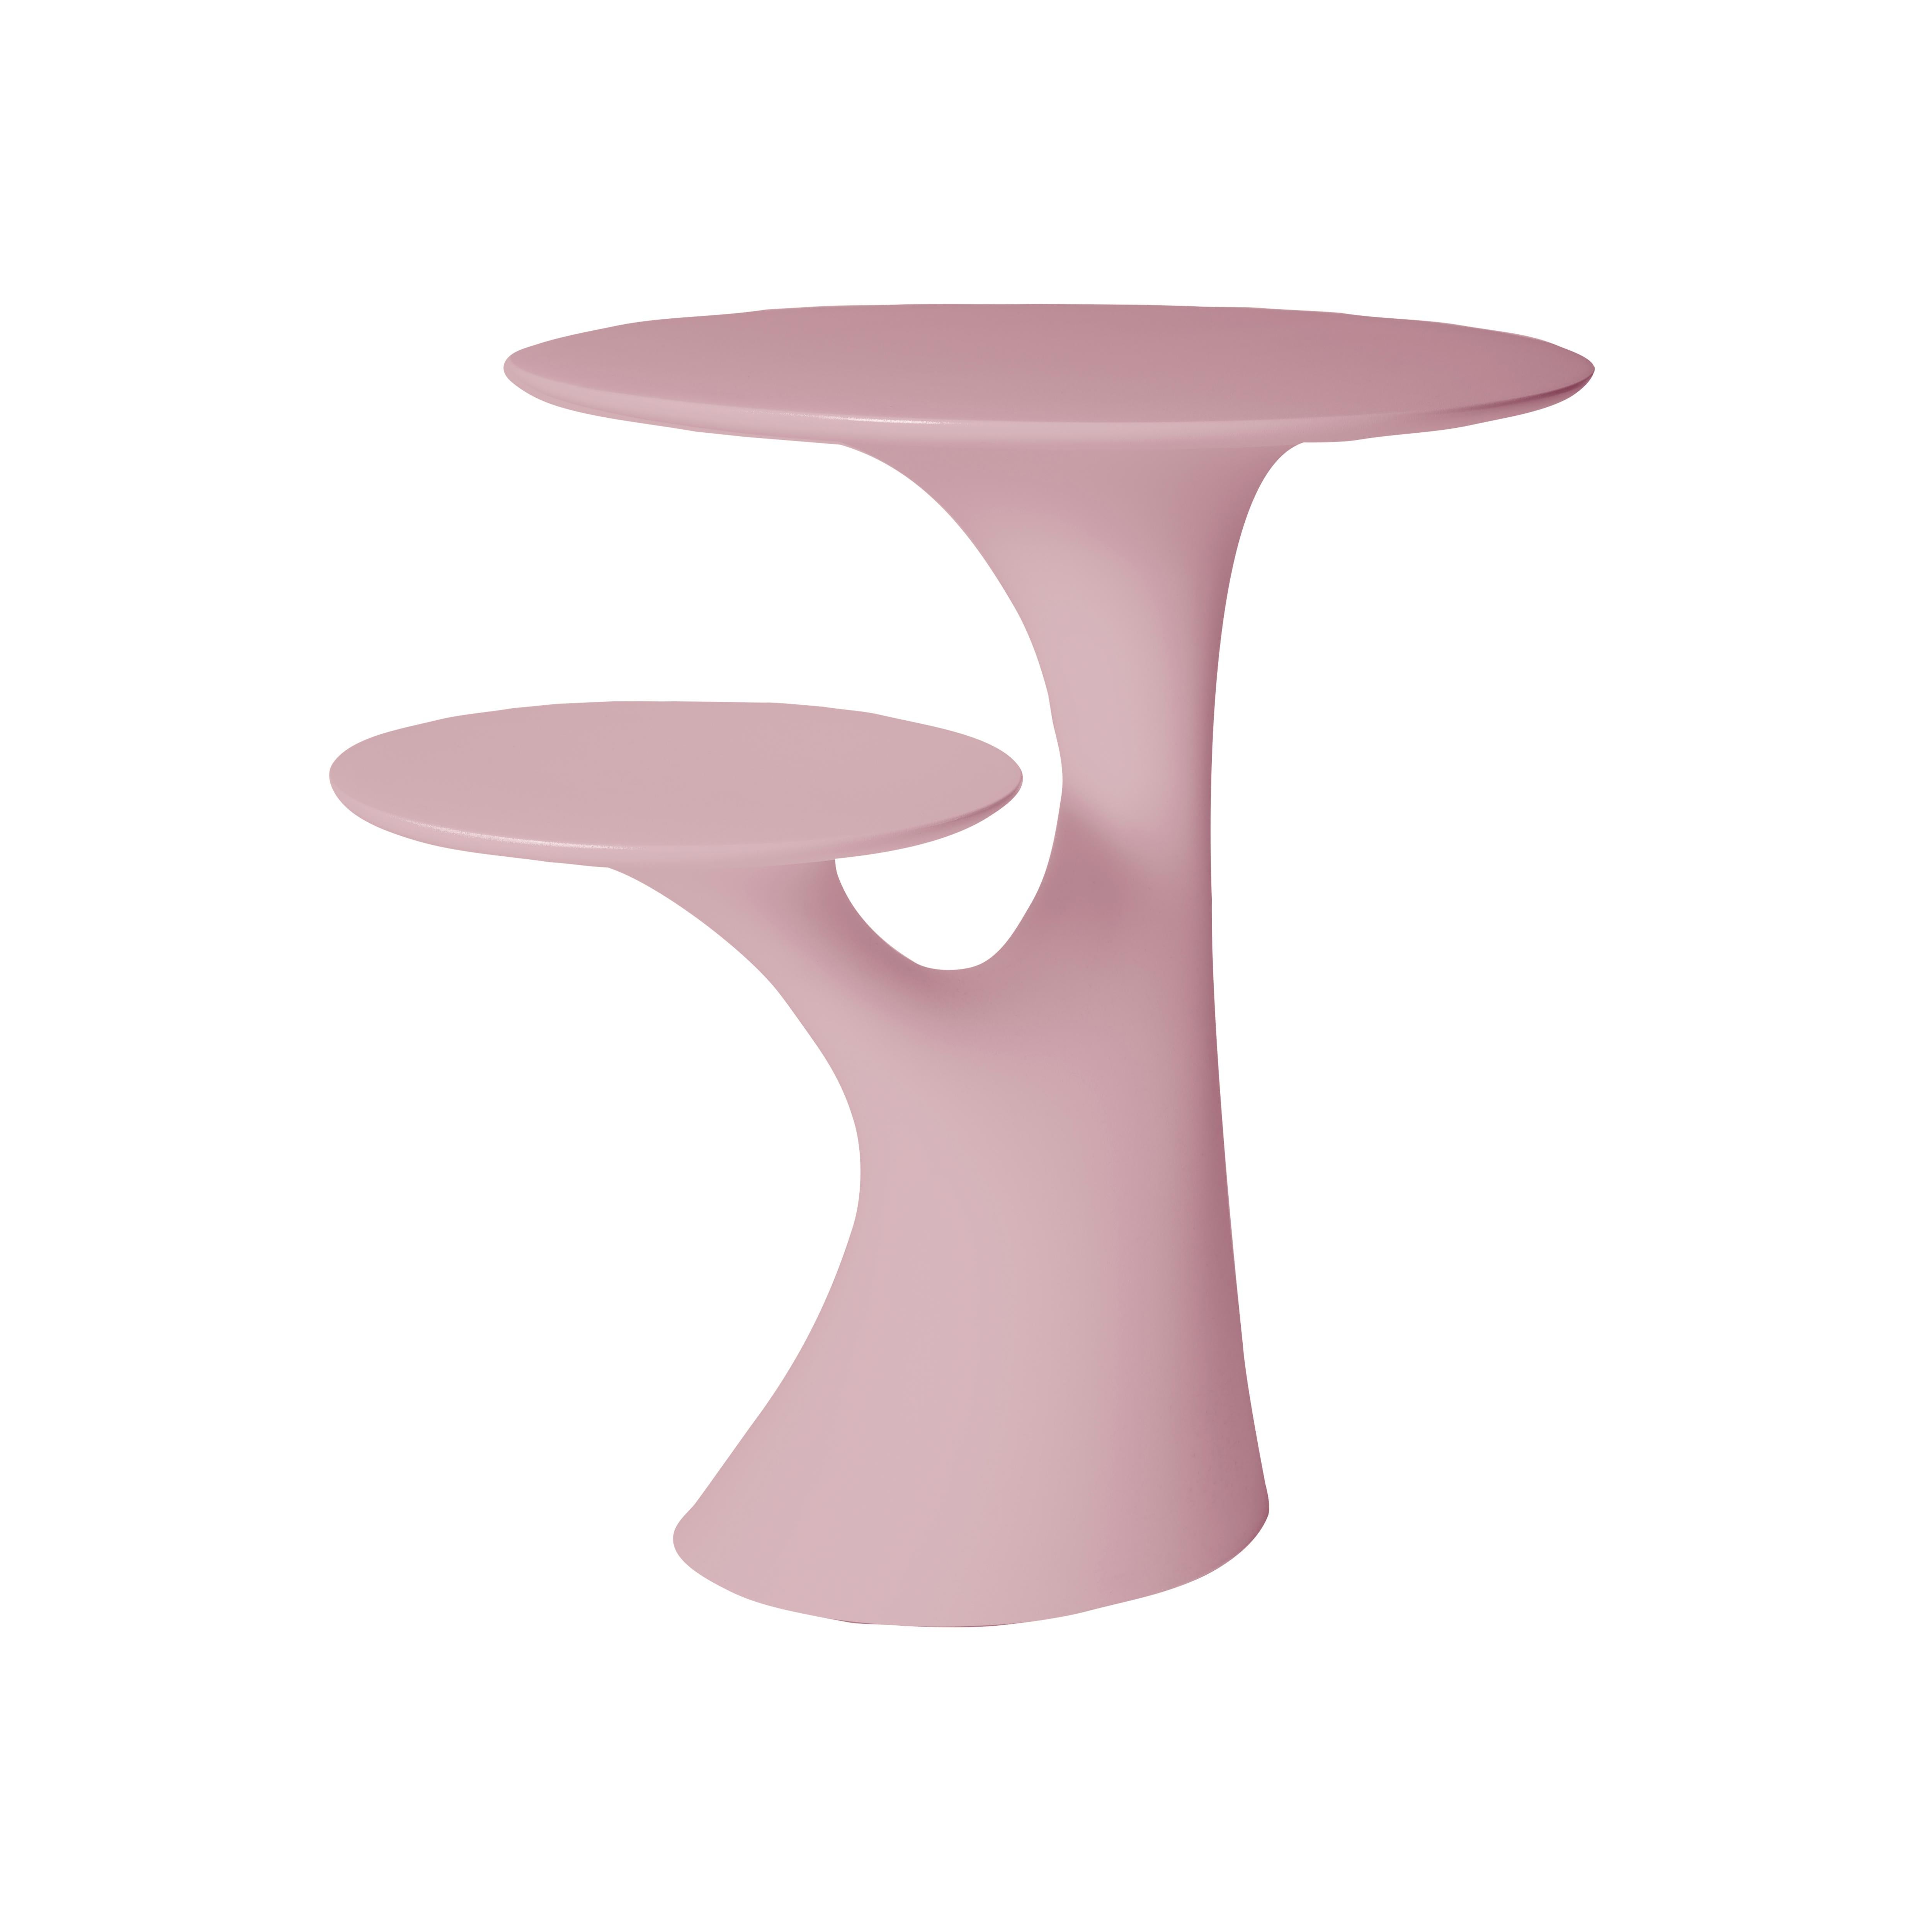 For Sale: Pink Modern Plastic White Gray Green Pink or Tree Side Table by Stefano Giovannoni 2